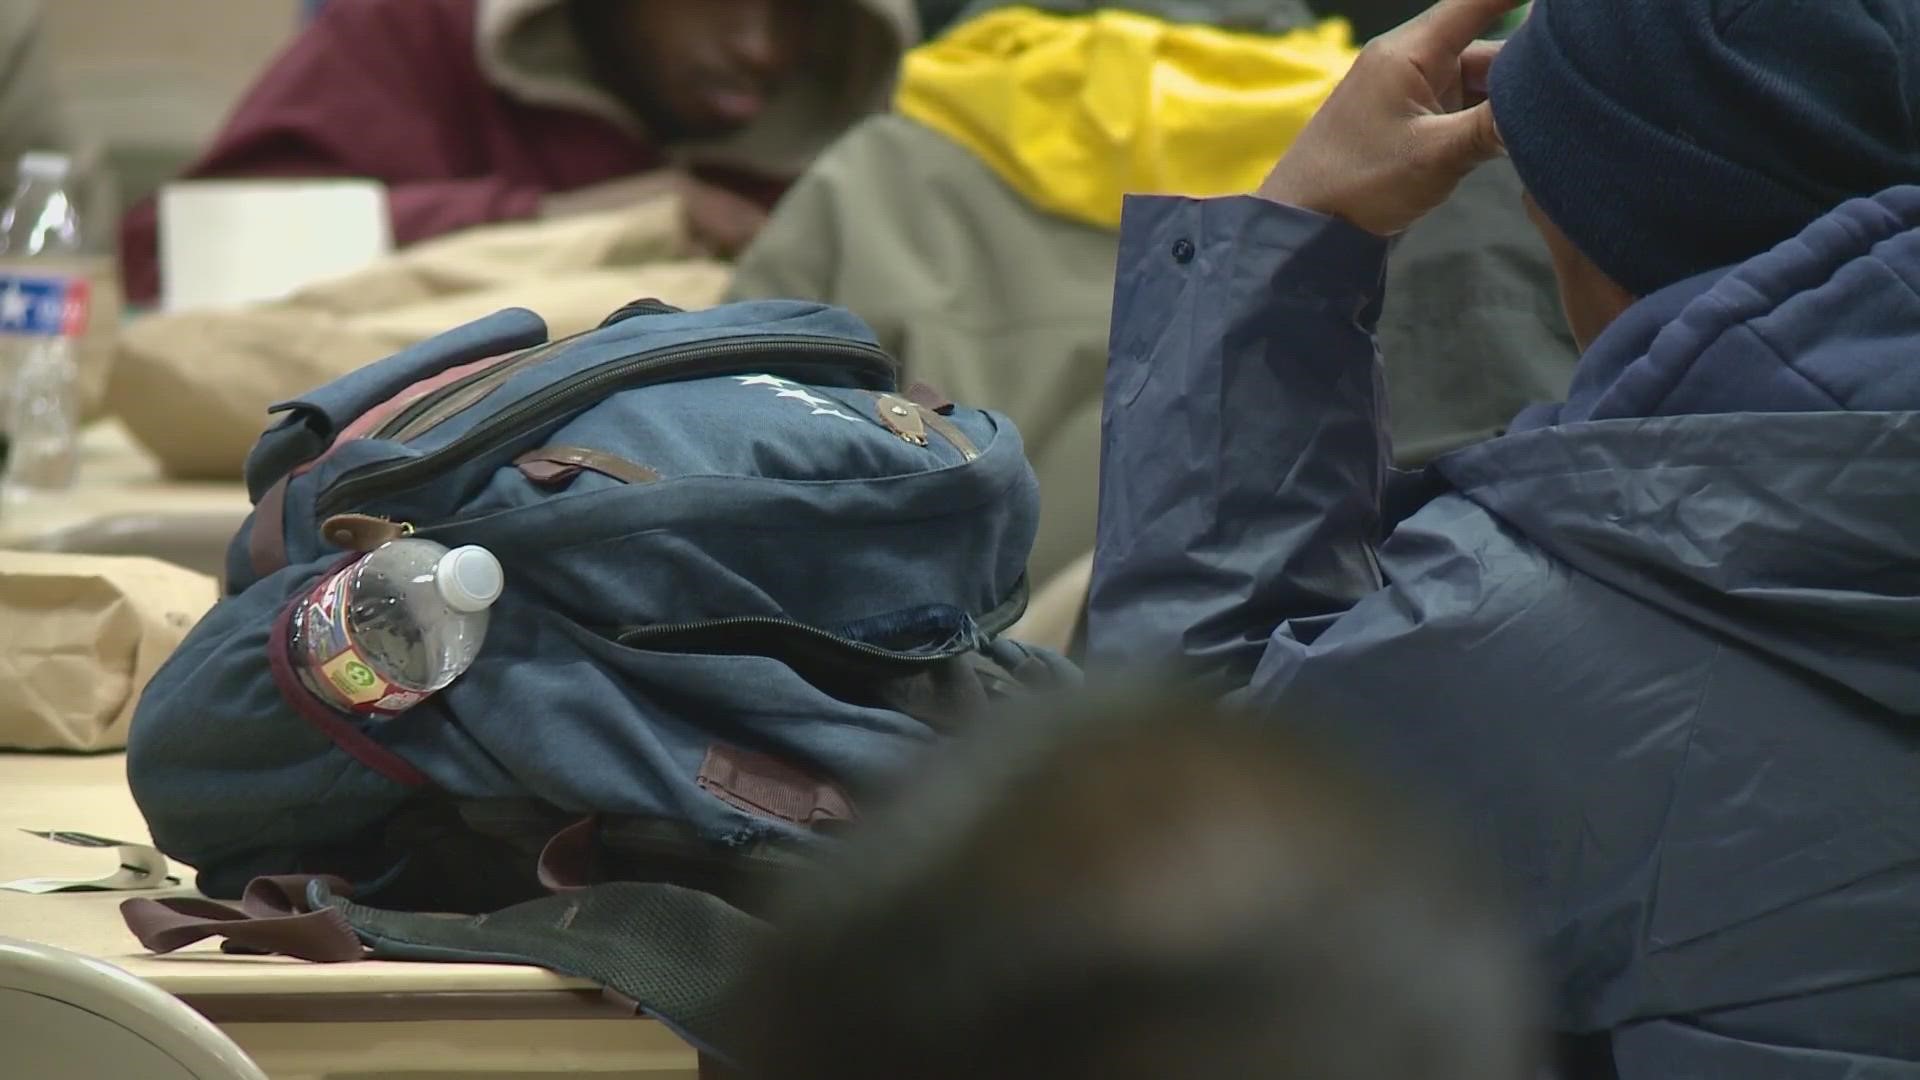 One shelter opened early to provide food and warmth, and donations of blankets and coats rolled in.